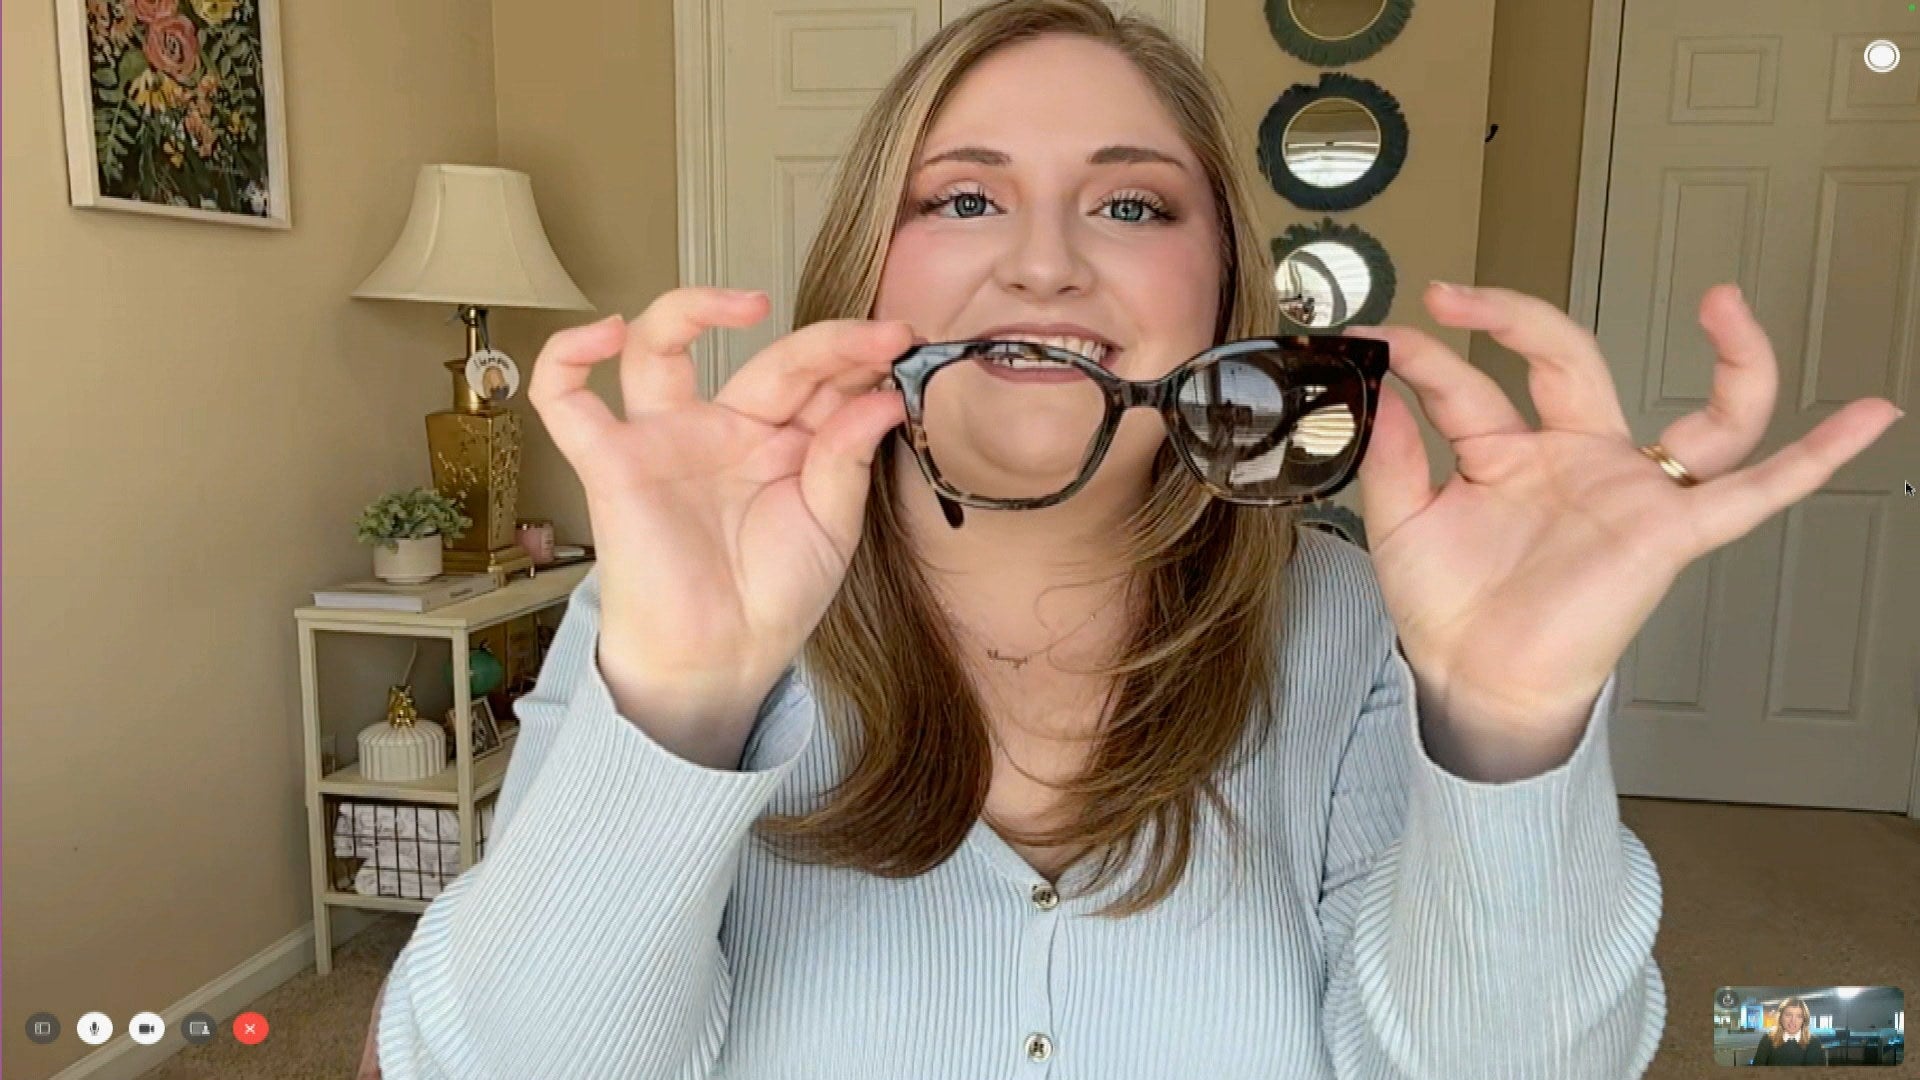 Woman Creates Shatter-Resistant Sunglasses After Losing Eye in Car Accident